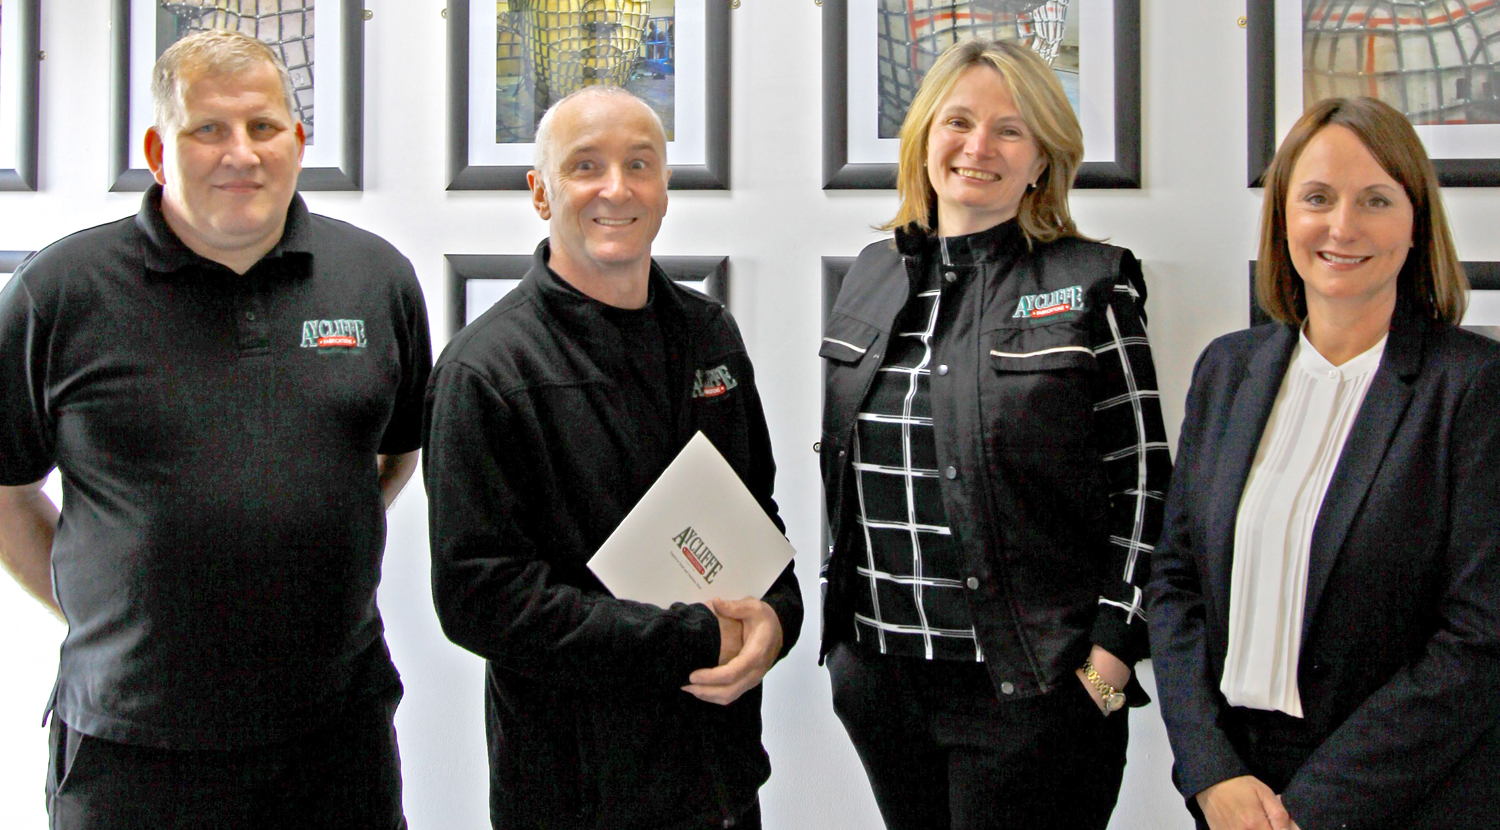 “The Head” Fabricator Appoints Marketing Expert